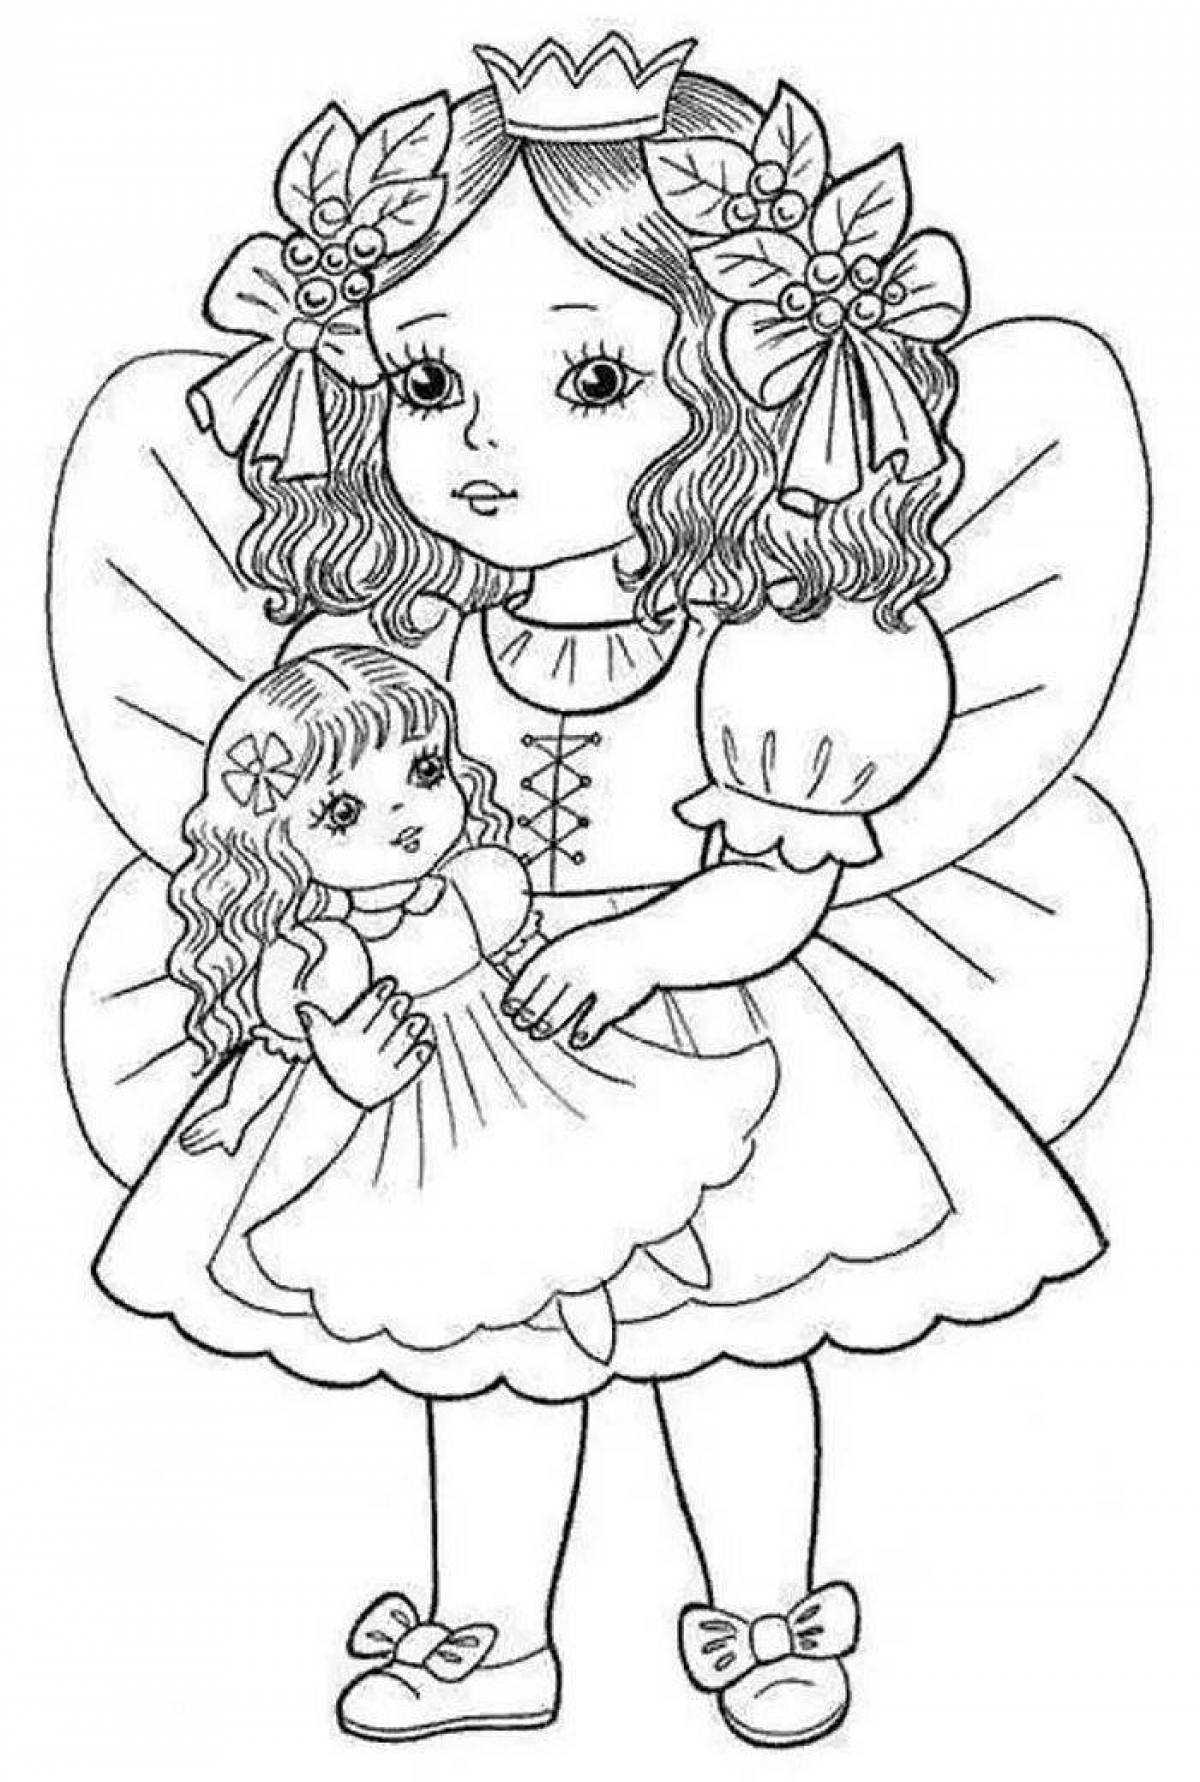 Coloring page serene girl with a bow